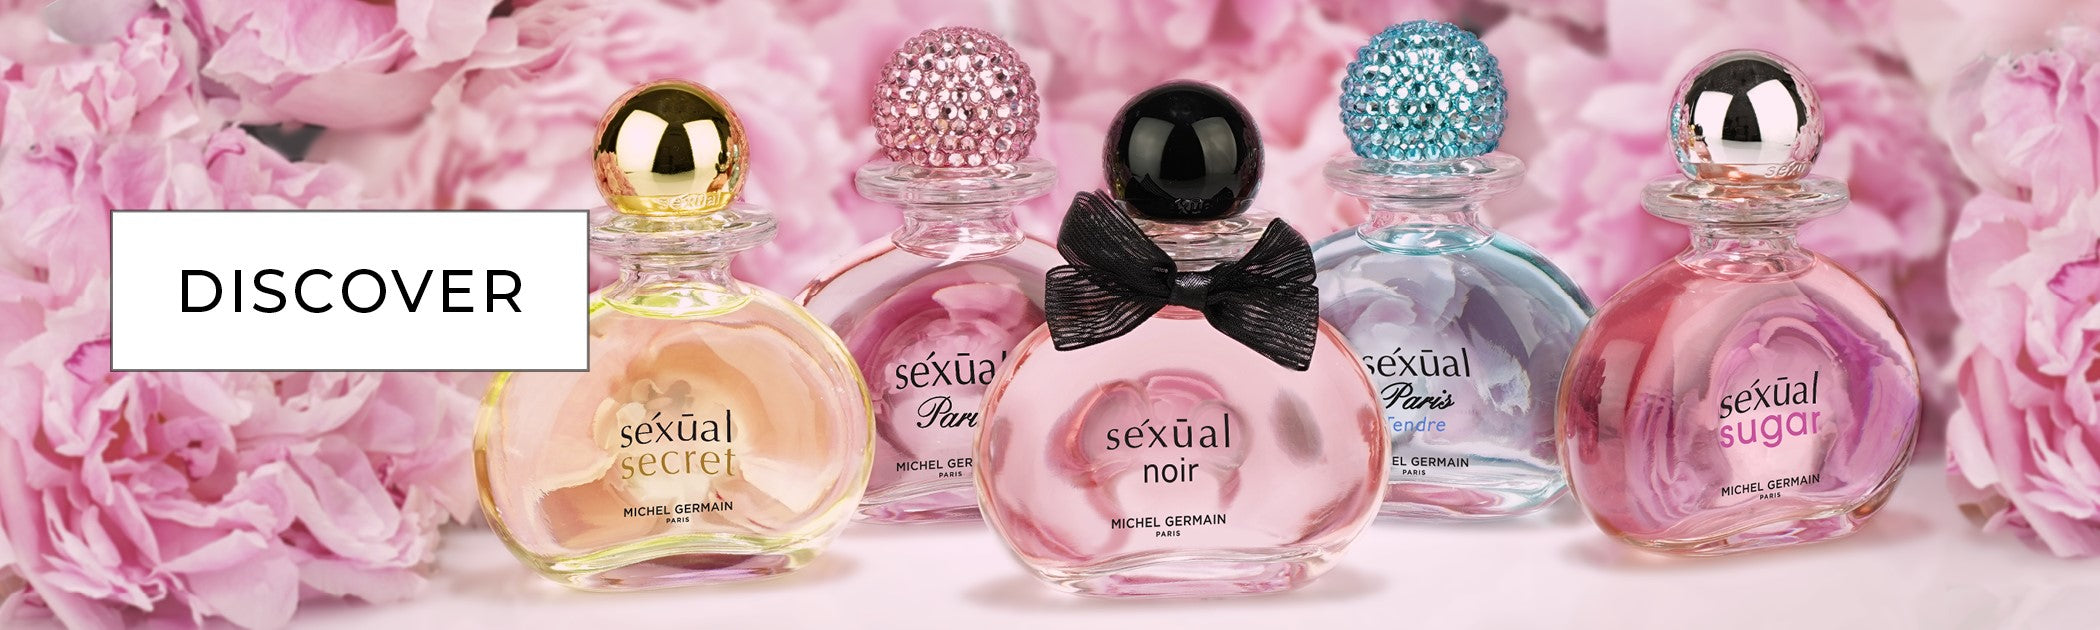 Sexual Perfume Discovery Banner